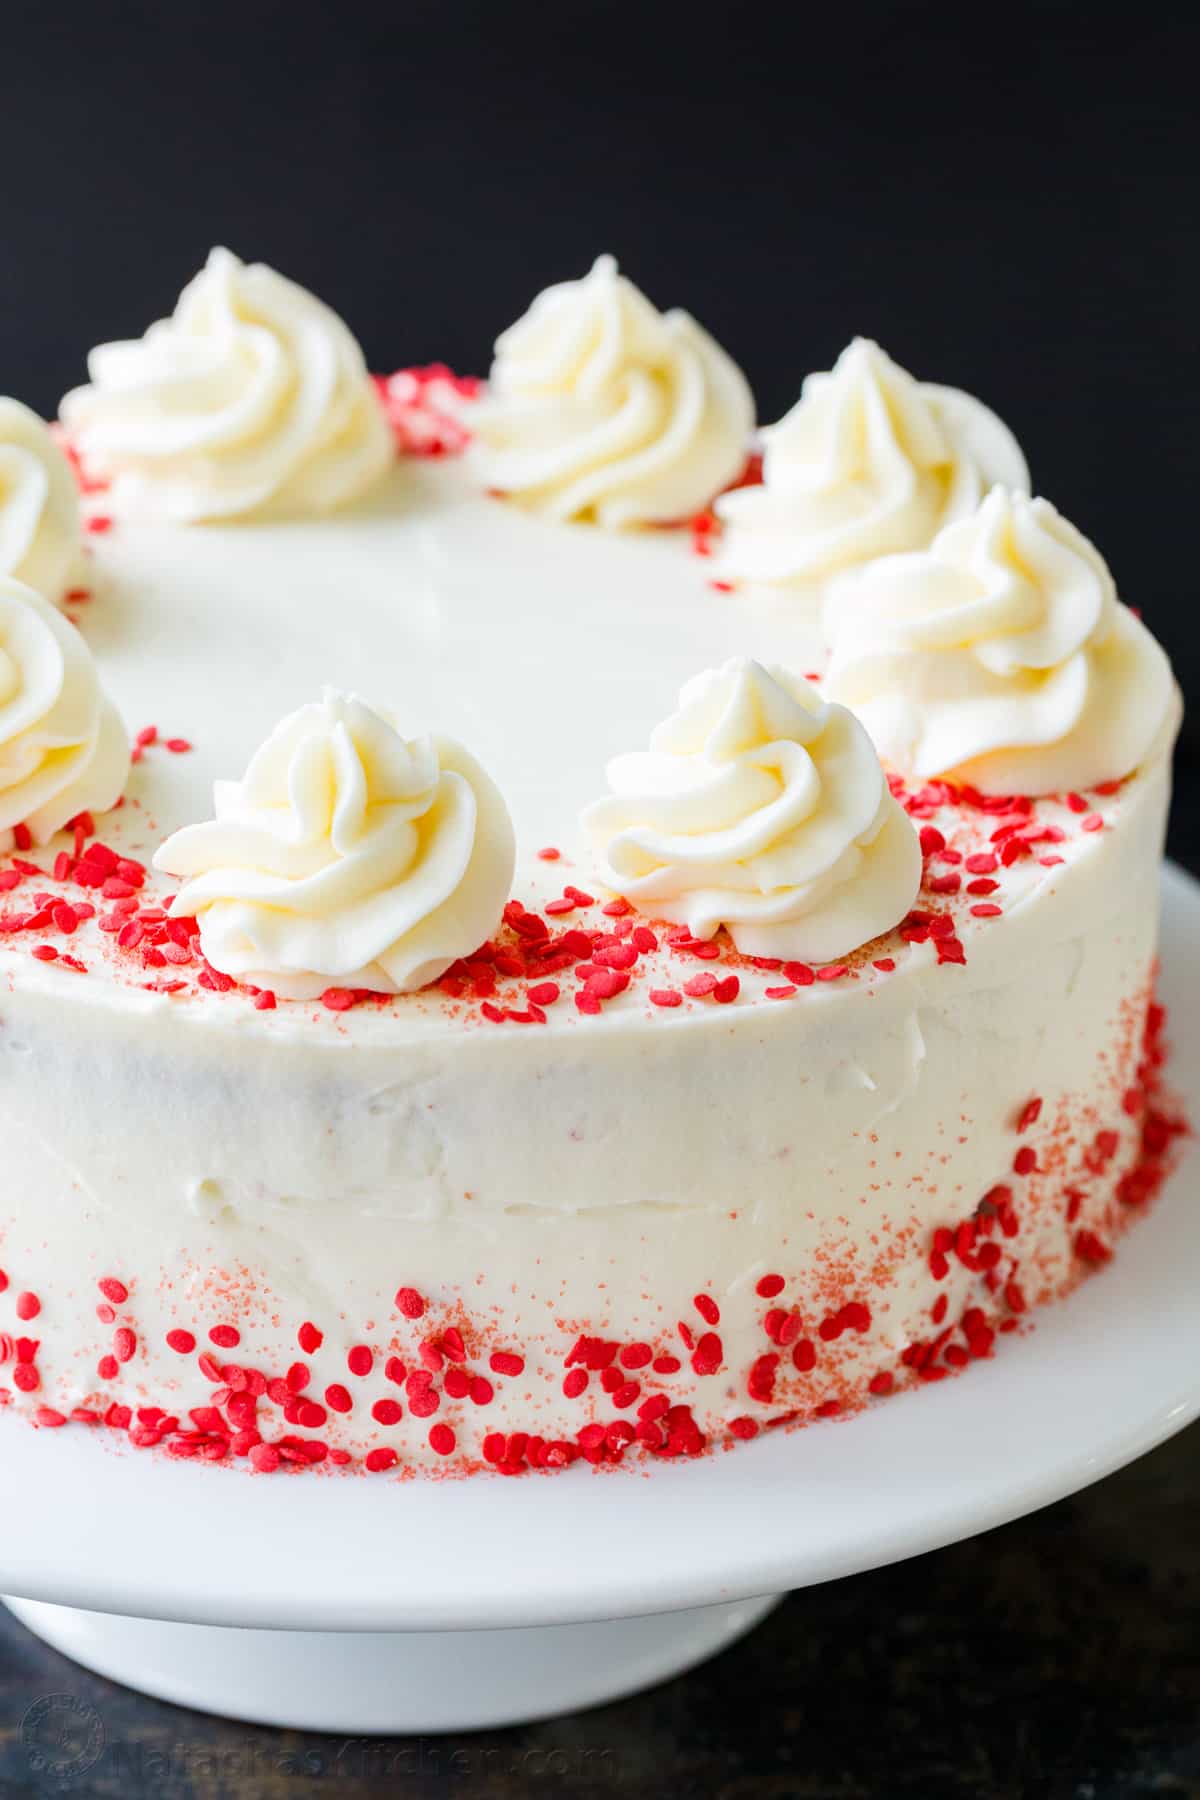 How to decorate red velvet cake with sprinkles and cream cheese frosting